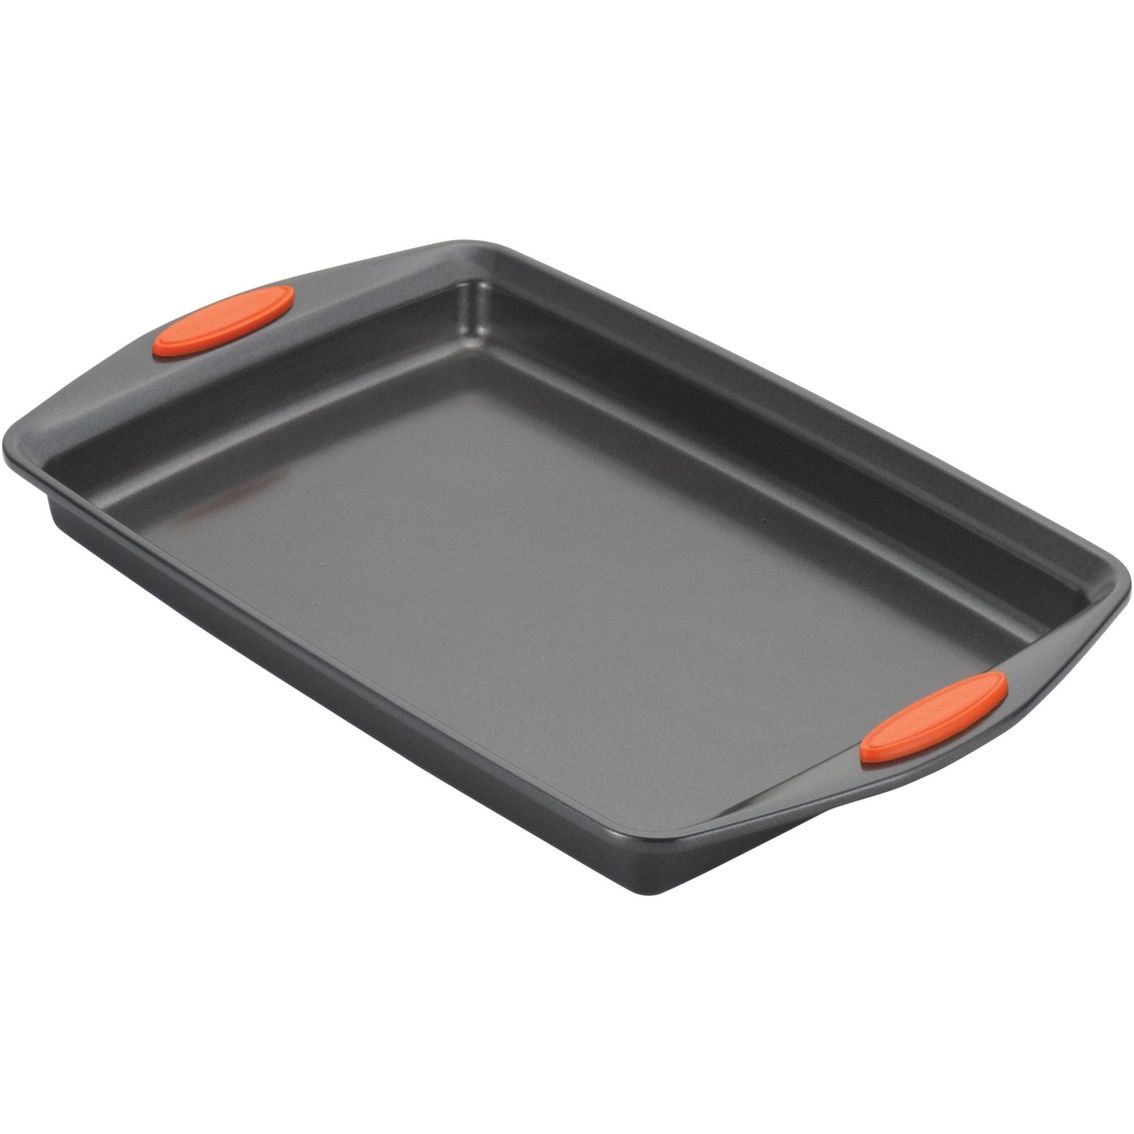 Rachael Ray Yum-o! Nonstick Bakeware 3 Pc. Oven Lovin' Cookie Pan Set - Image 3 of 4